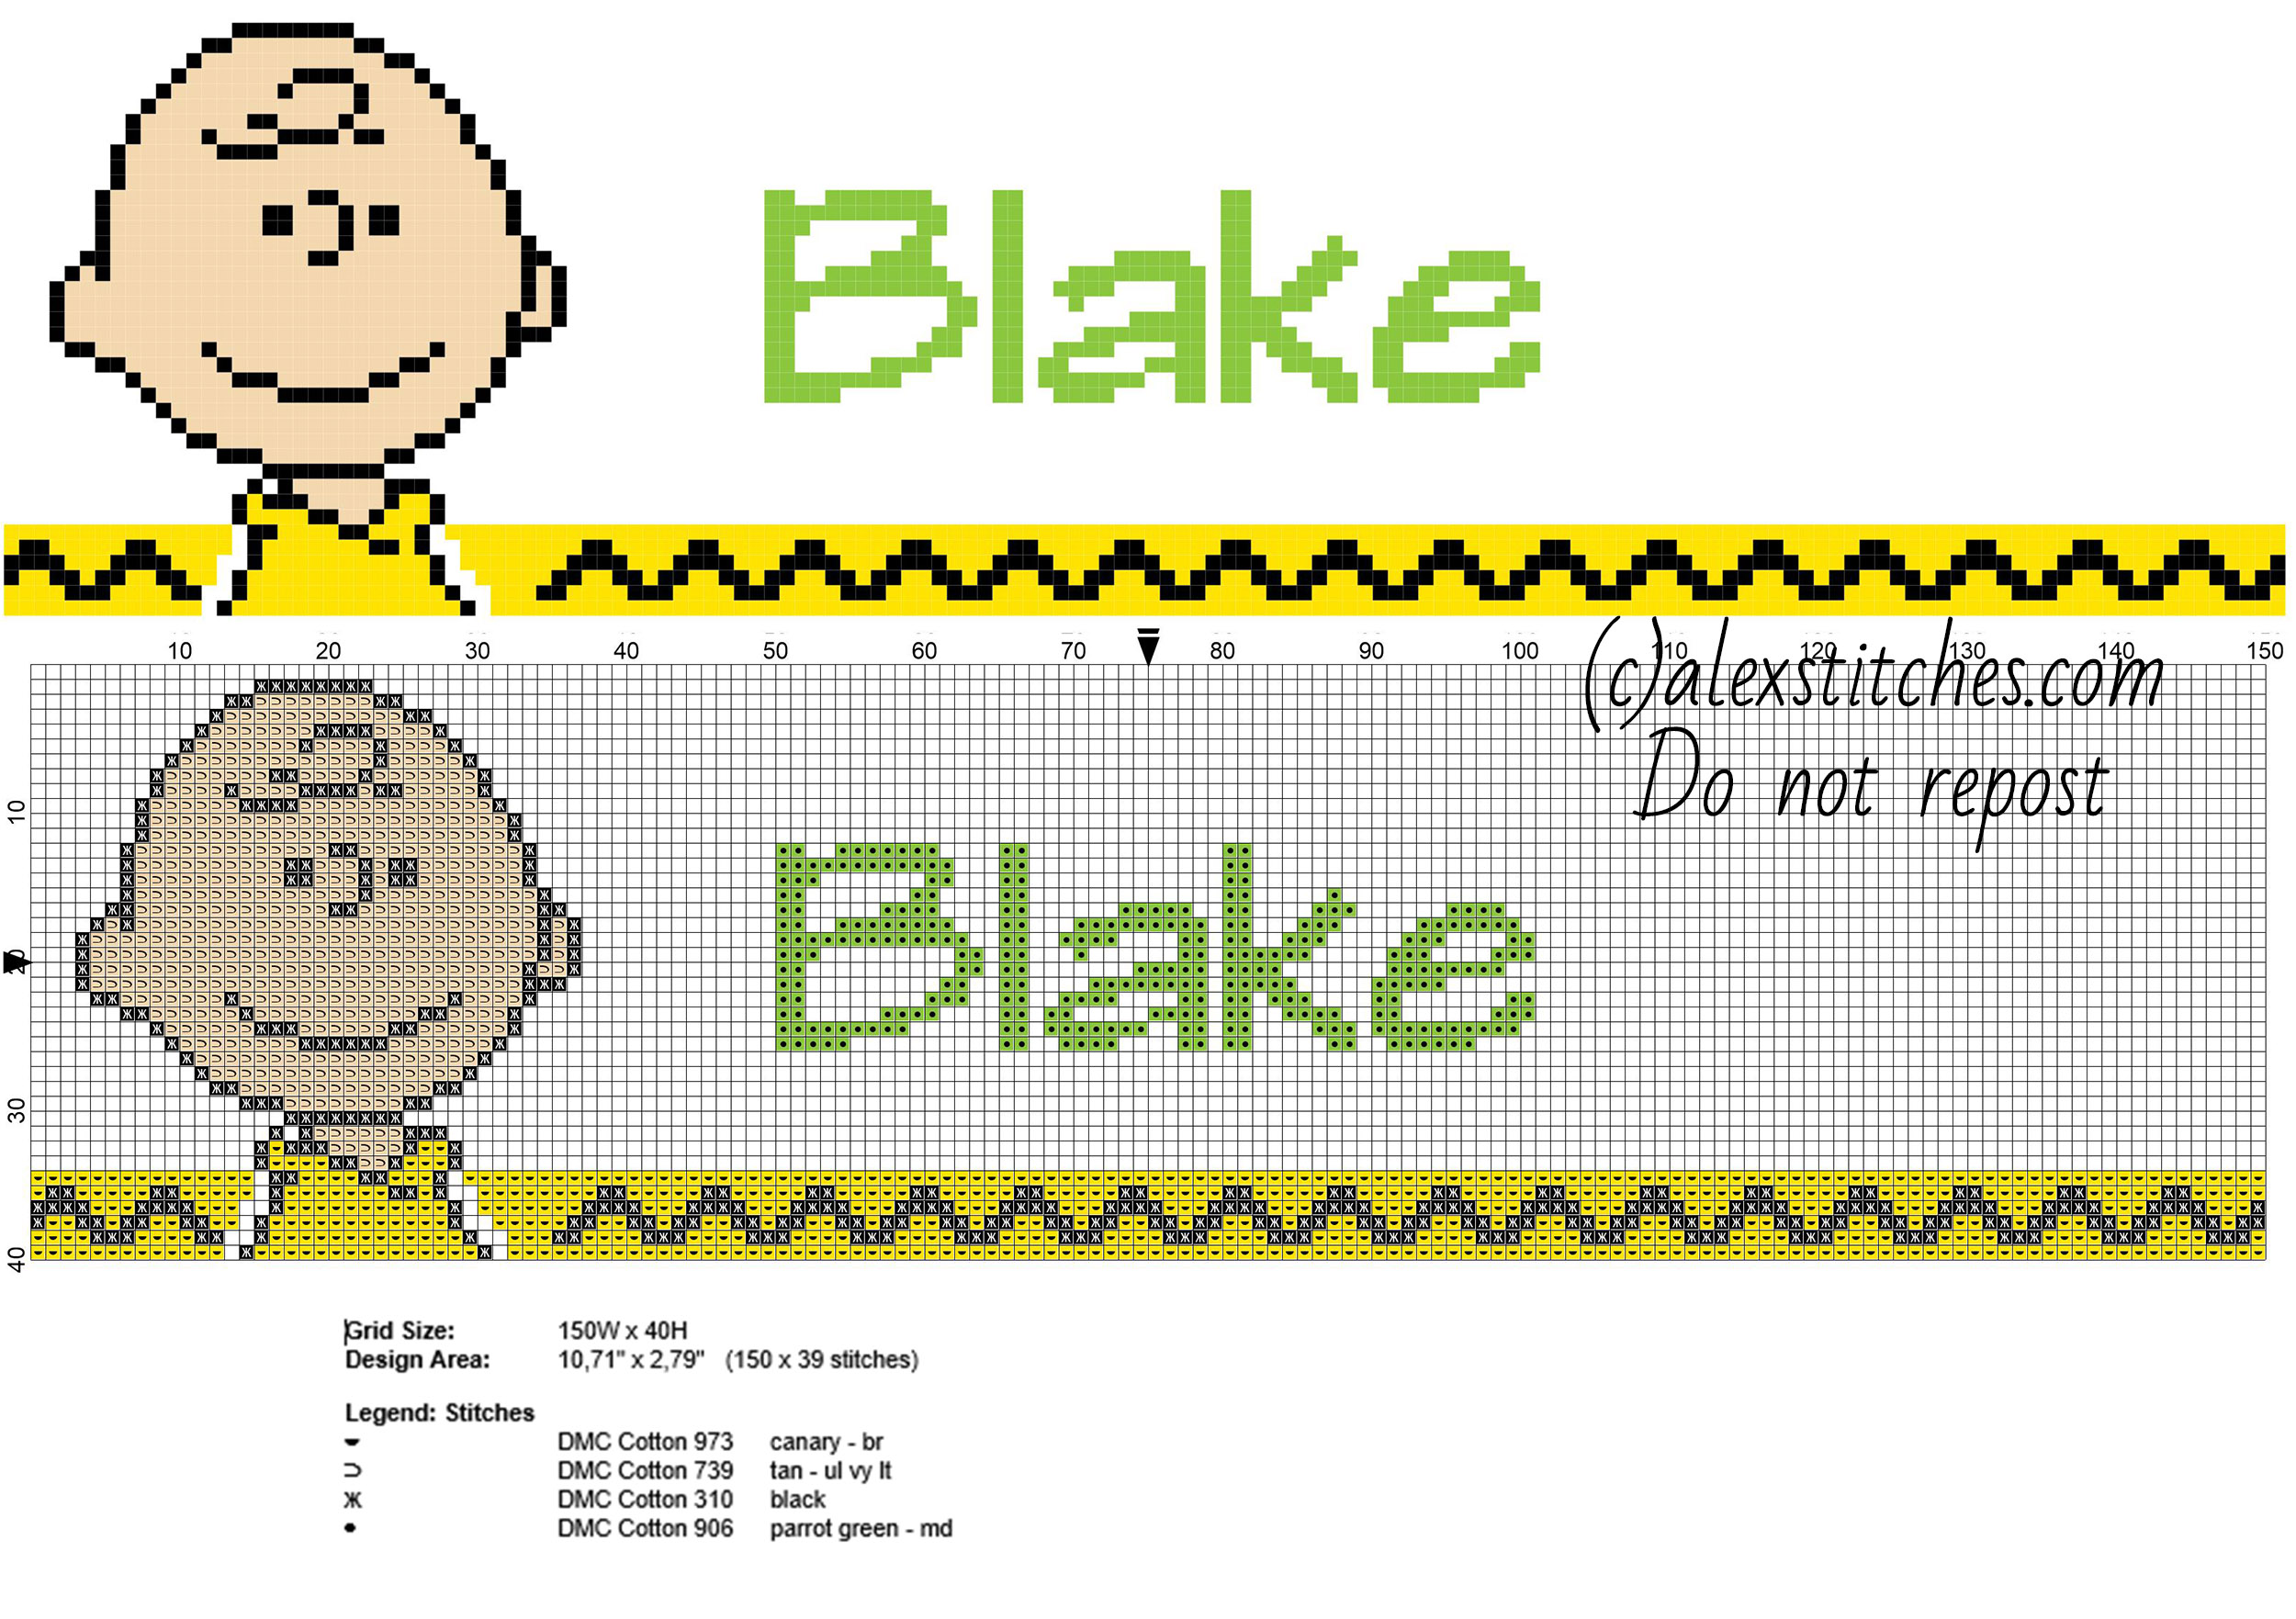 Blake cross stitch baby male name with Peanuts Charlie Brown